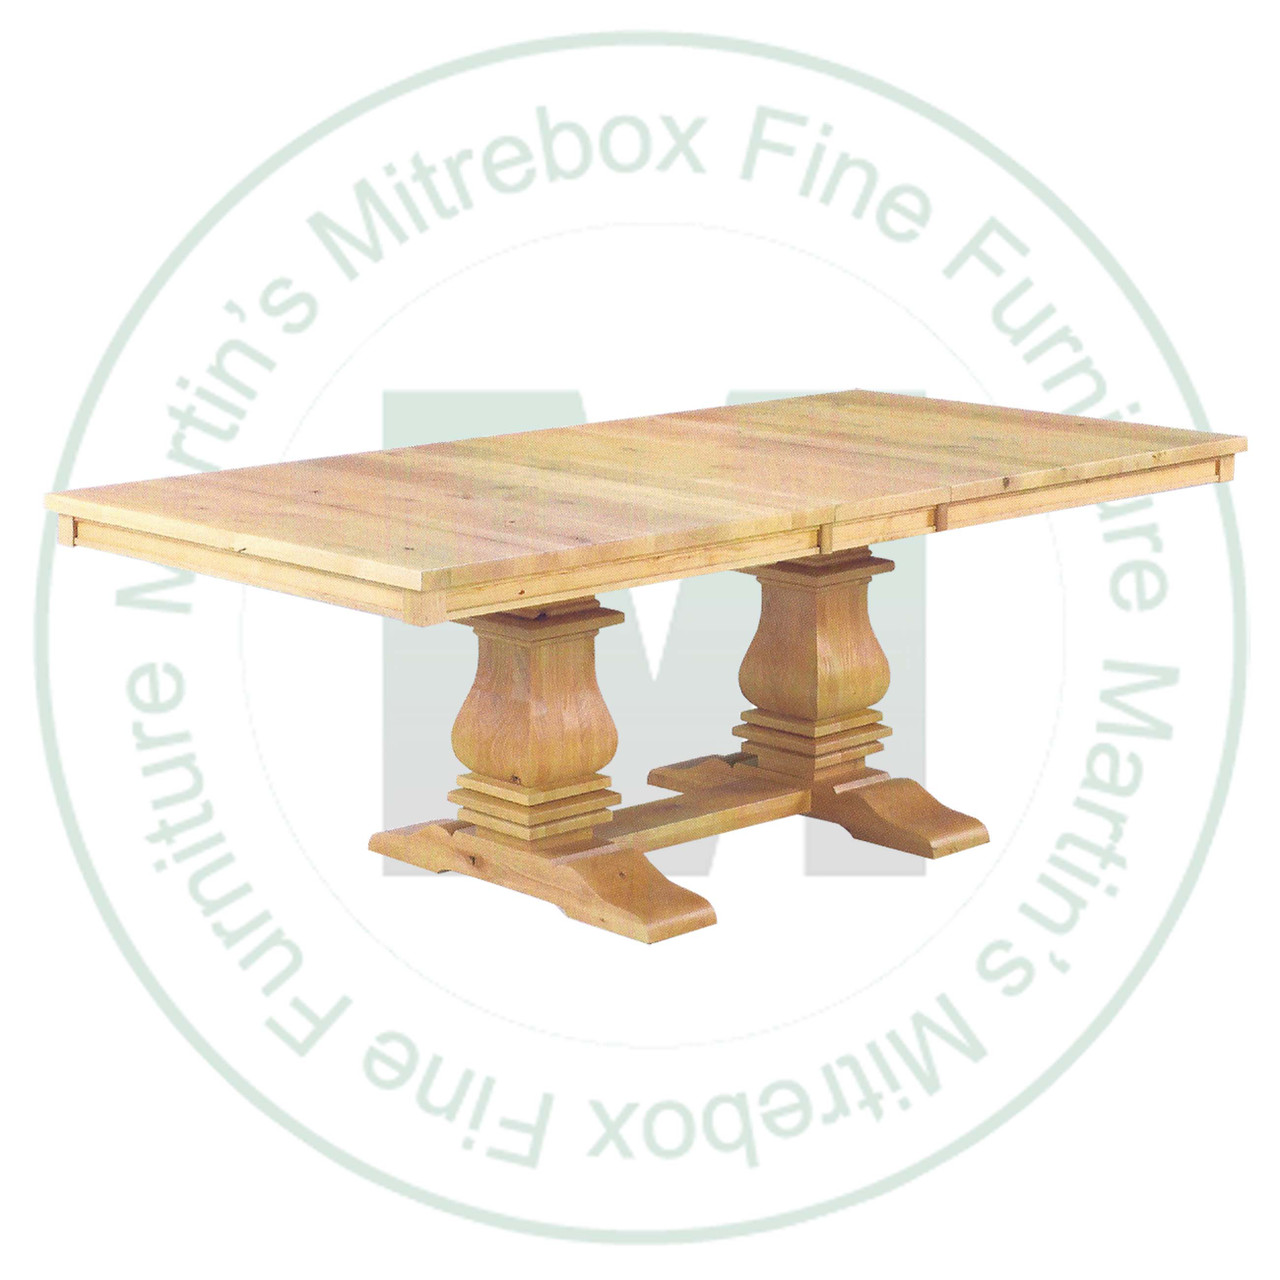 Wormy Maple Mediterranean Double Pedestal Table 48''D x 72''W x 30''H With 2 - 12'' Leaves. Table Has 1.25'' Thick Top